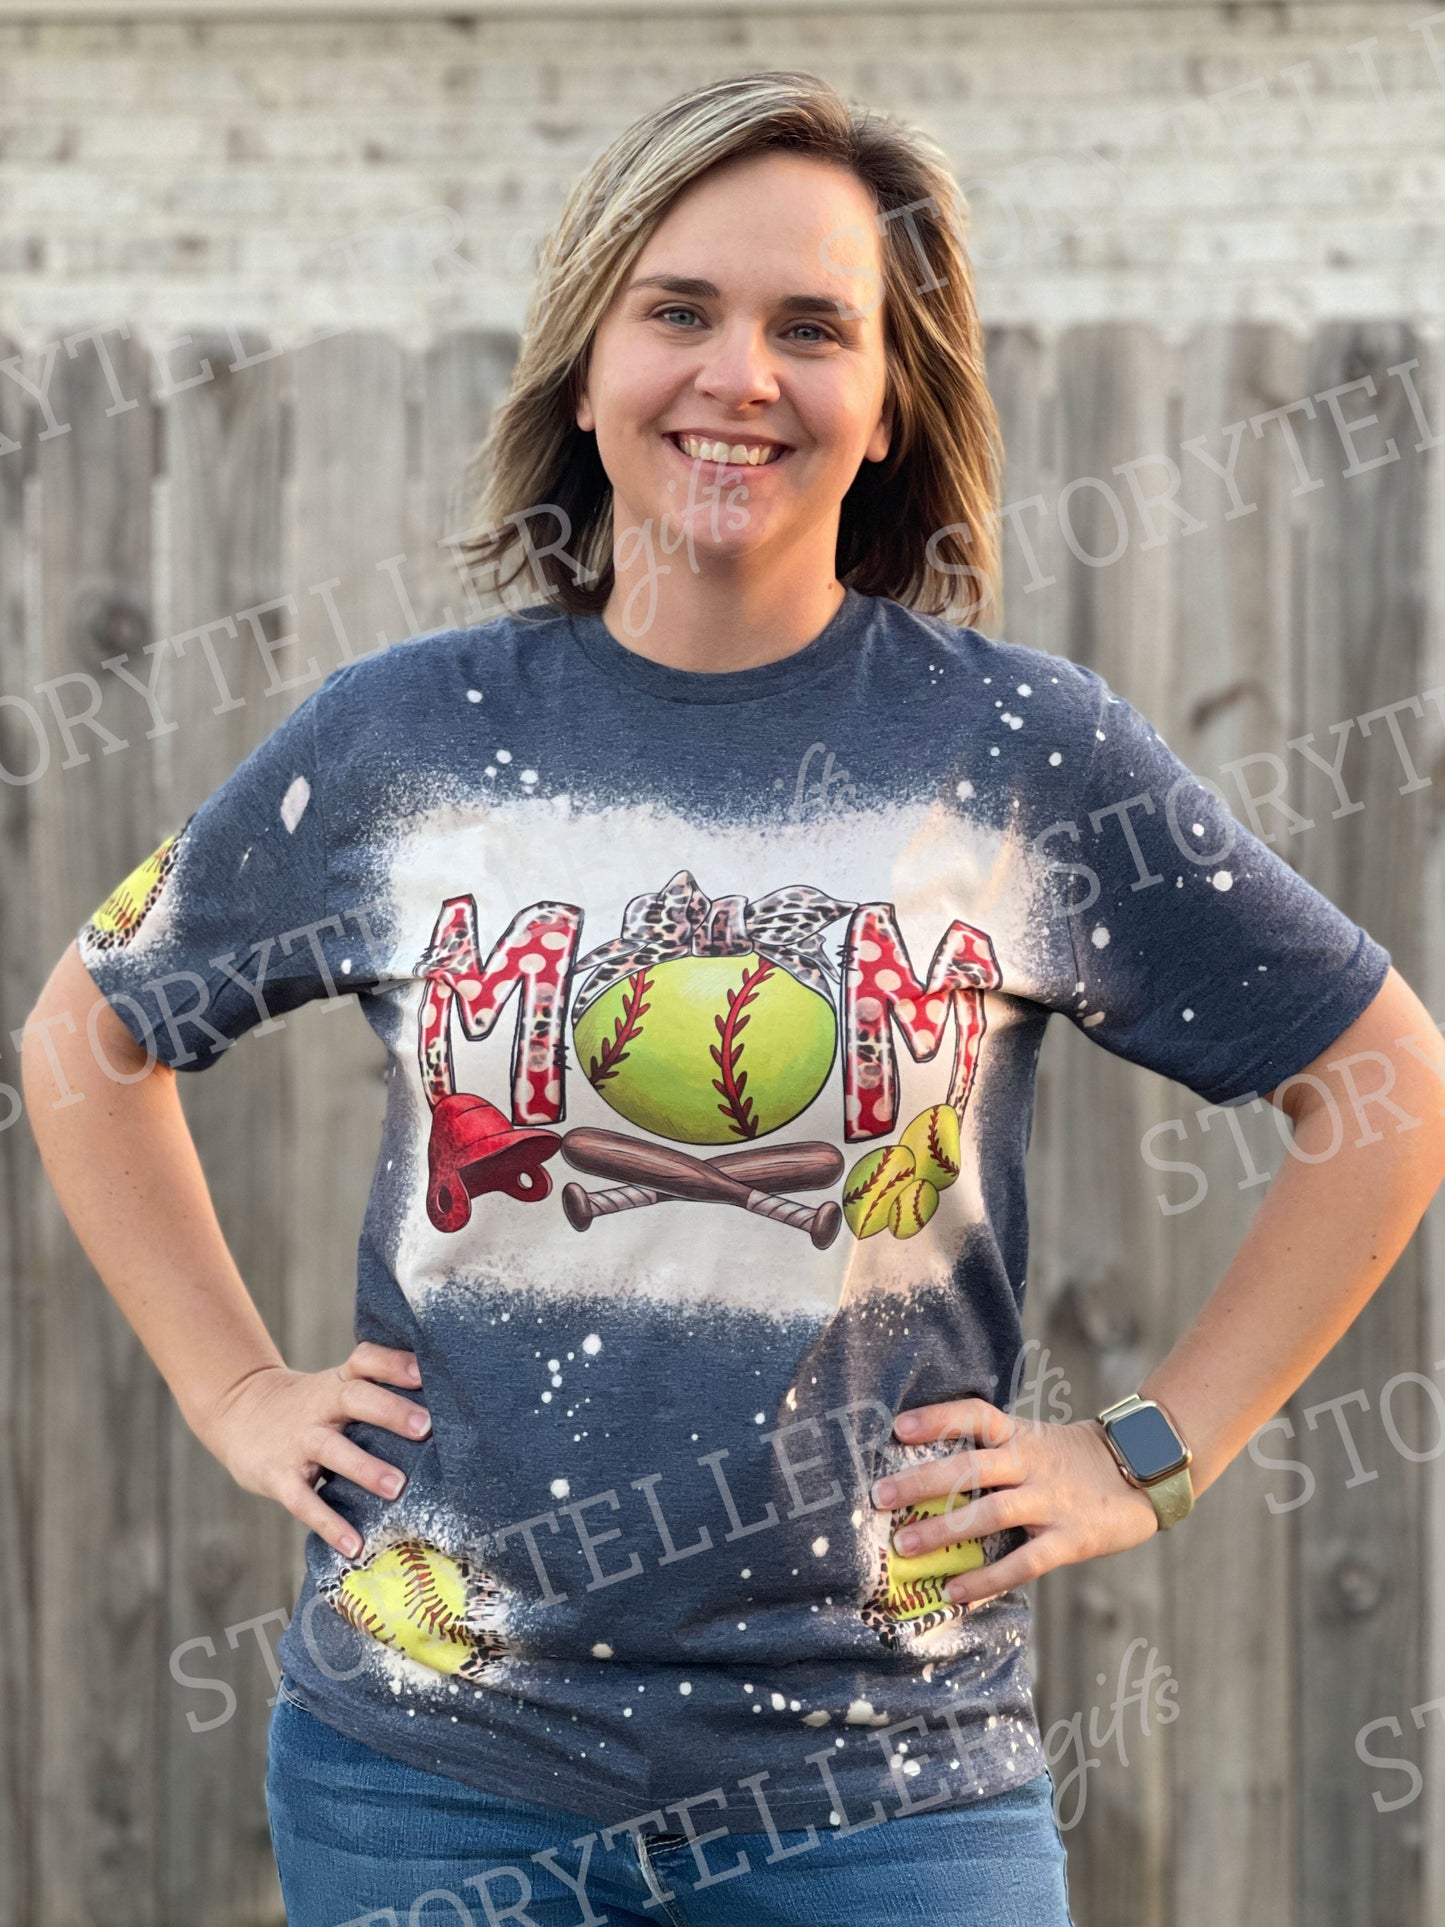 Bleached Baseball Mom Tshirt with Patches of Baseballs and Leopard Print, Bleached Navy Shirt for Baseball Moms, Baseball Shirt, Game Day